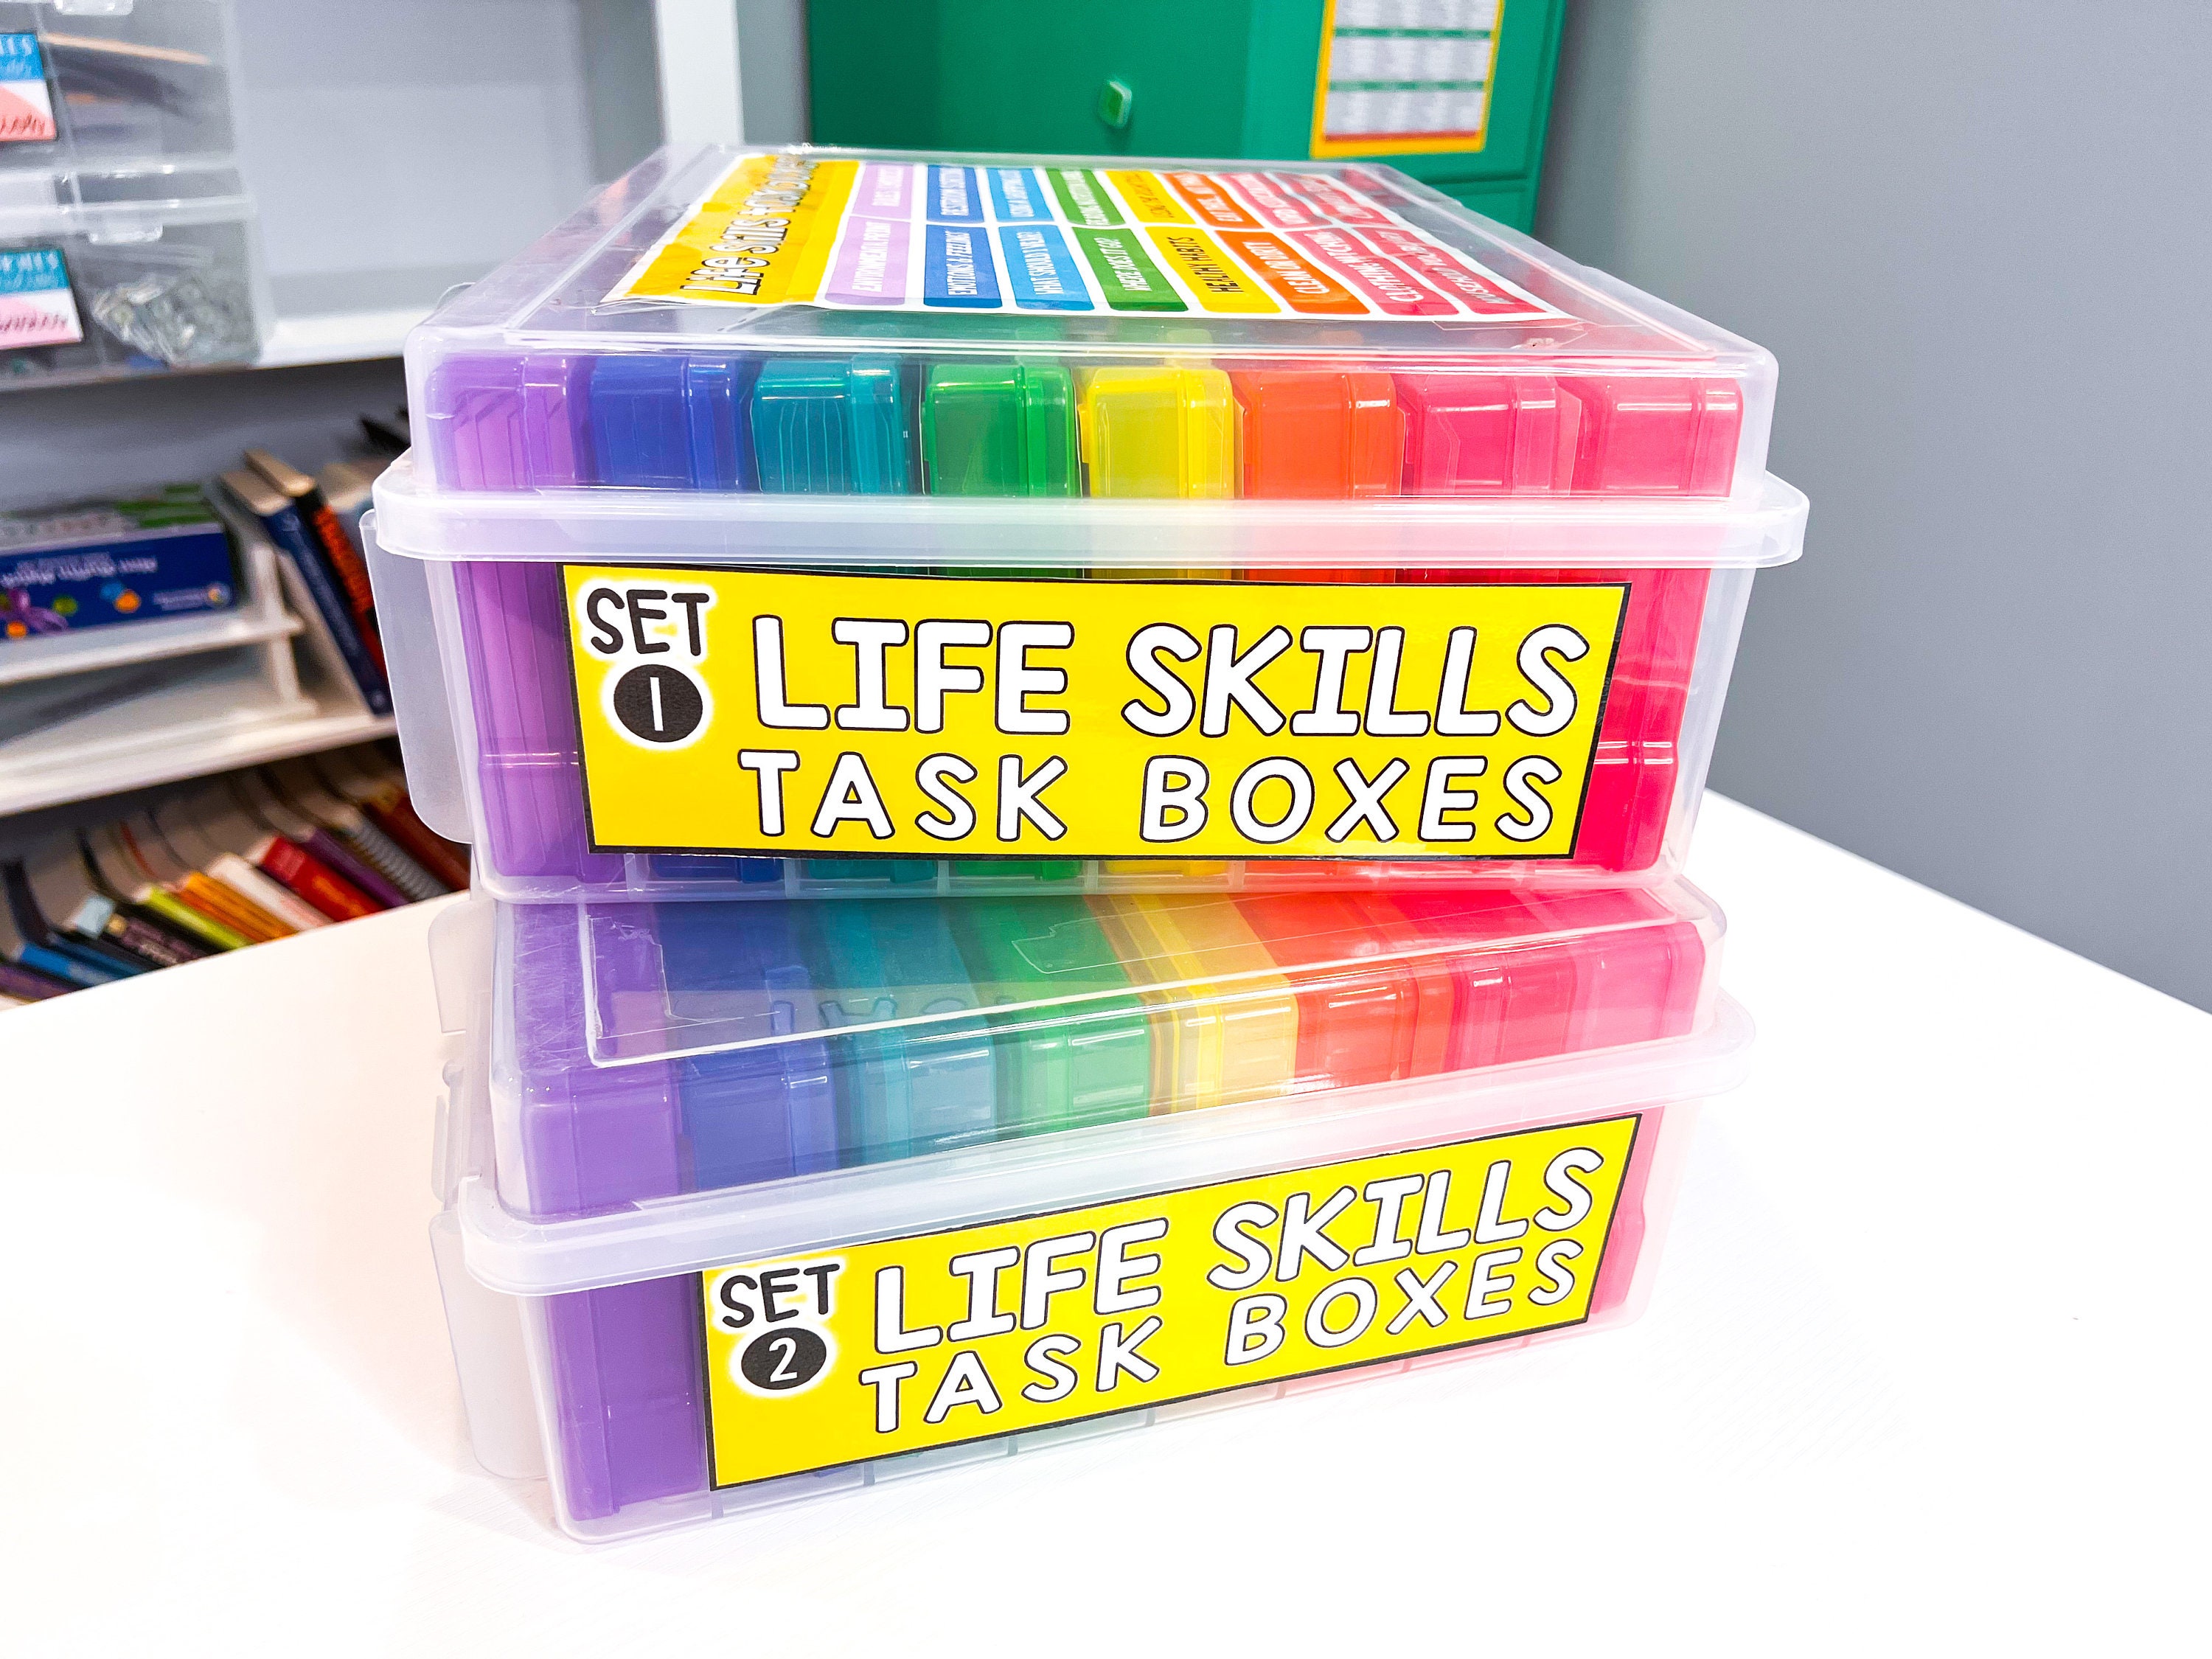 Buy Task Boxes, Autism Curriculum Online, Task Boxes for Sale — ShoeboxTasks